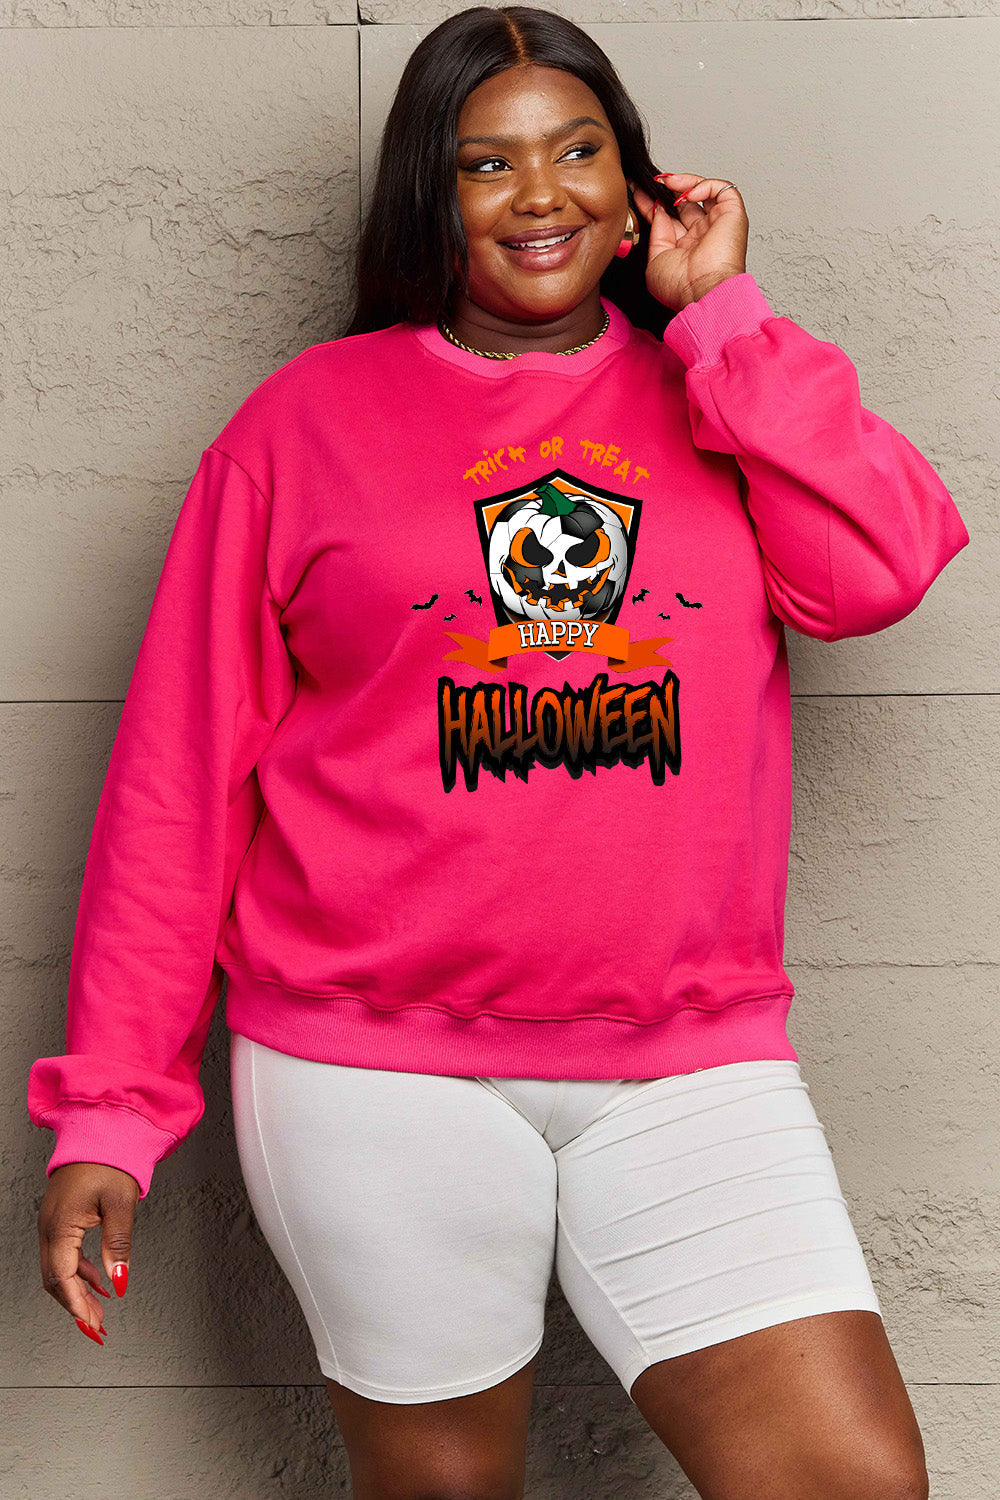 Simply Love Full Size TRICK OR TREAT HAPPY HALLOWEEN Graphic Sweatshirt BLUE ZONE PLANET